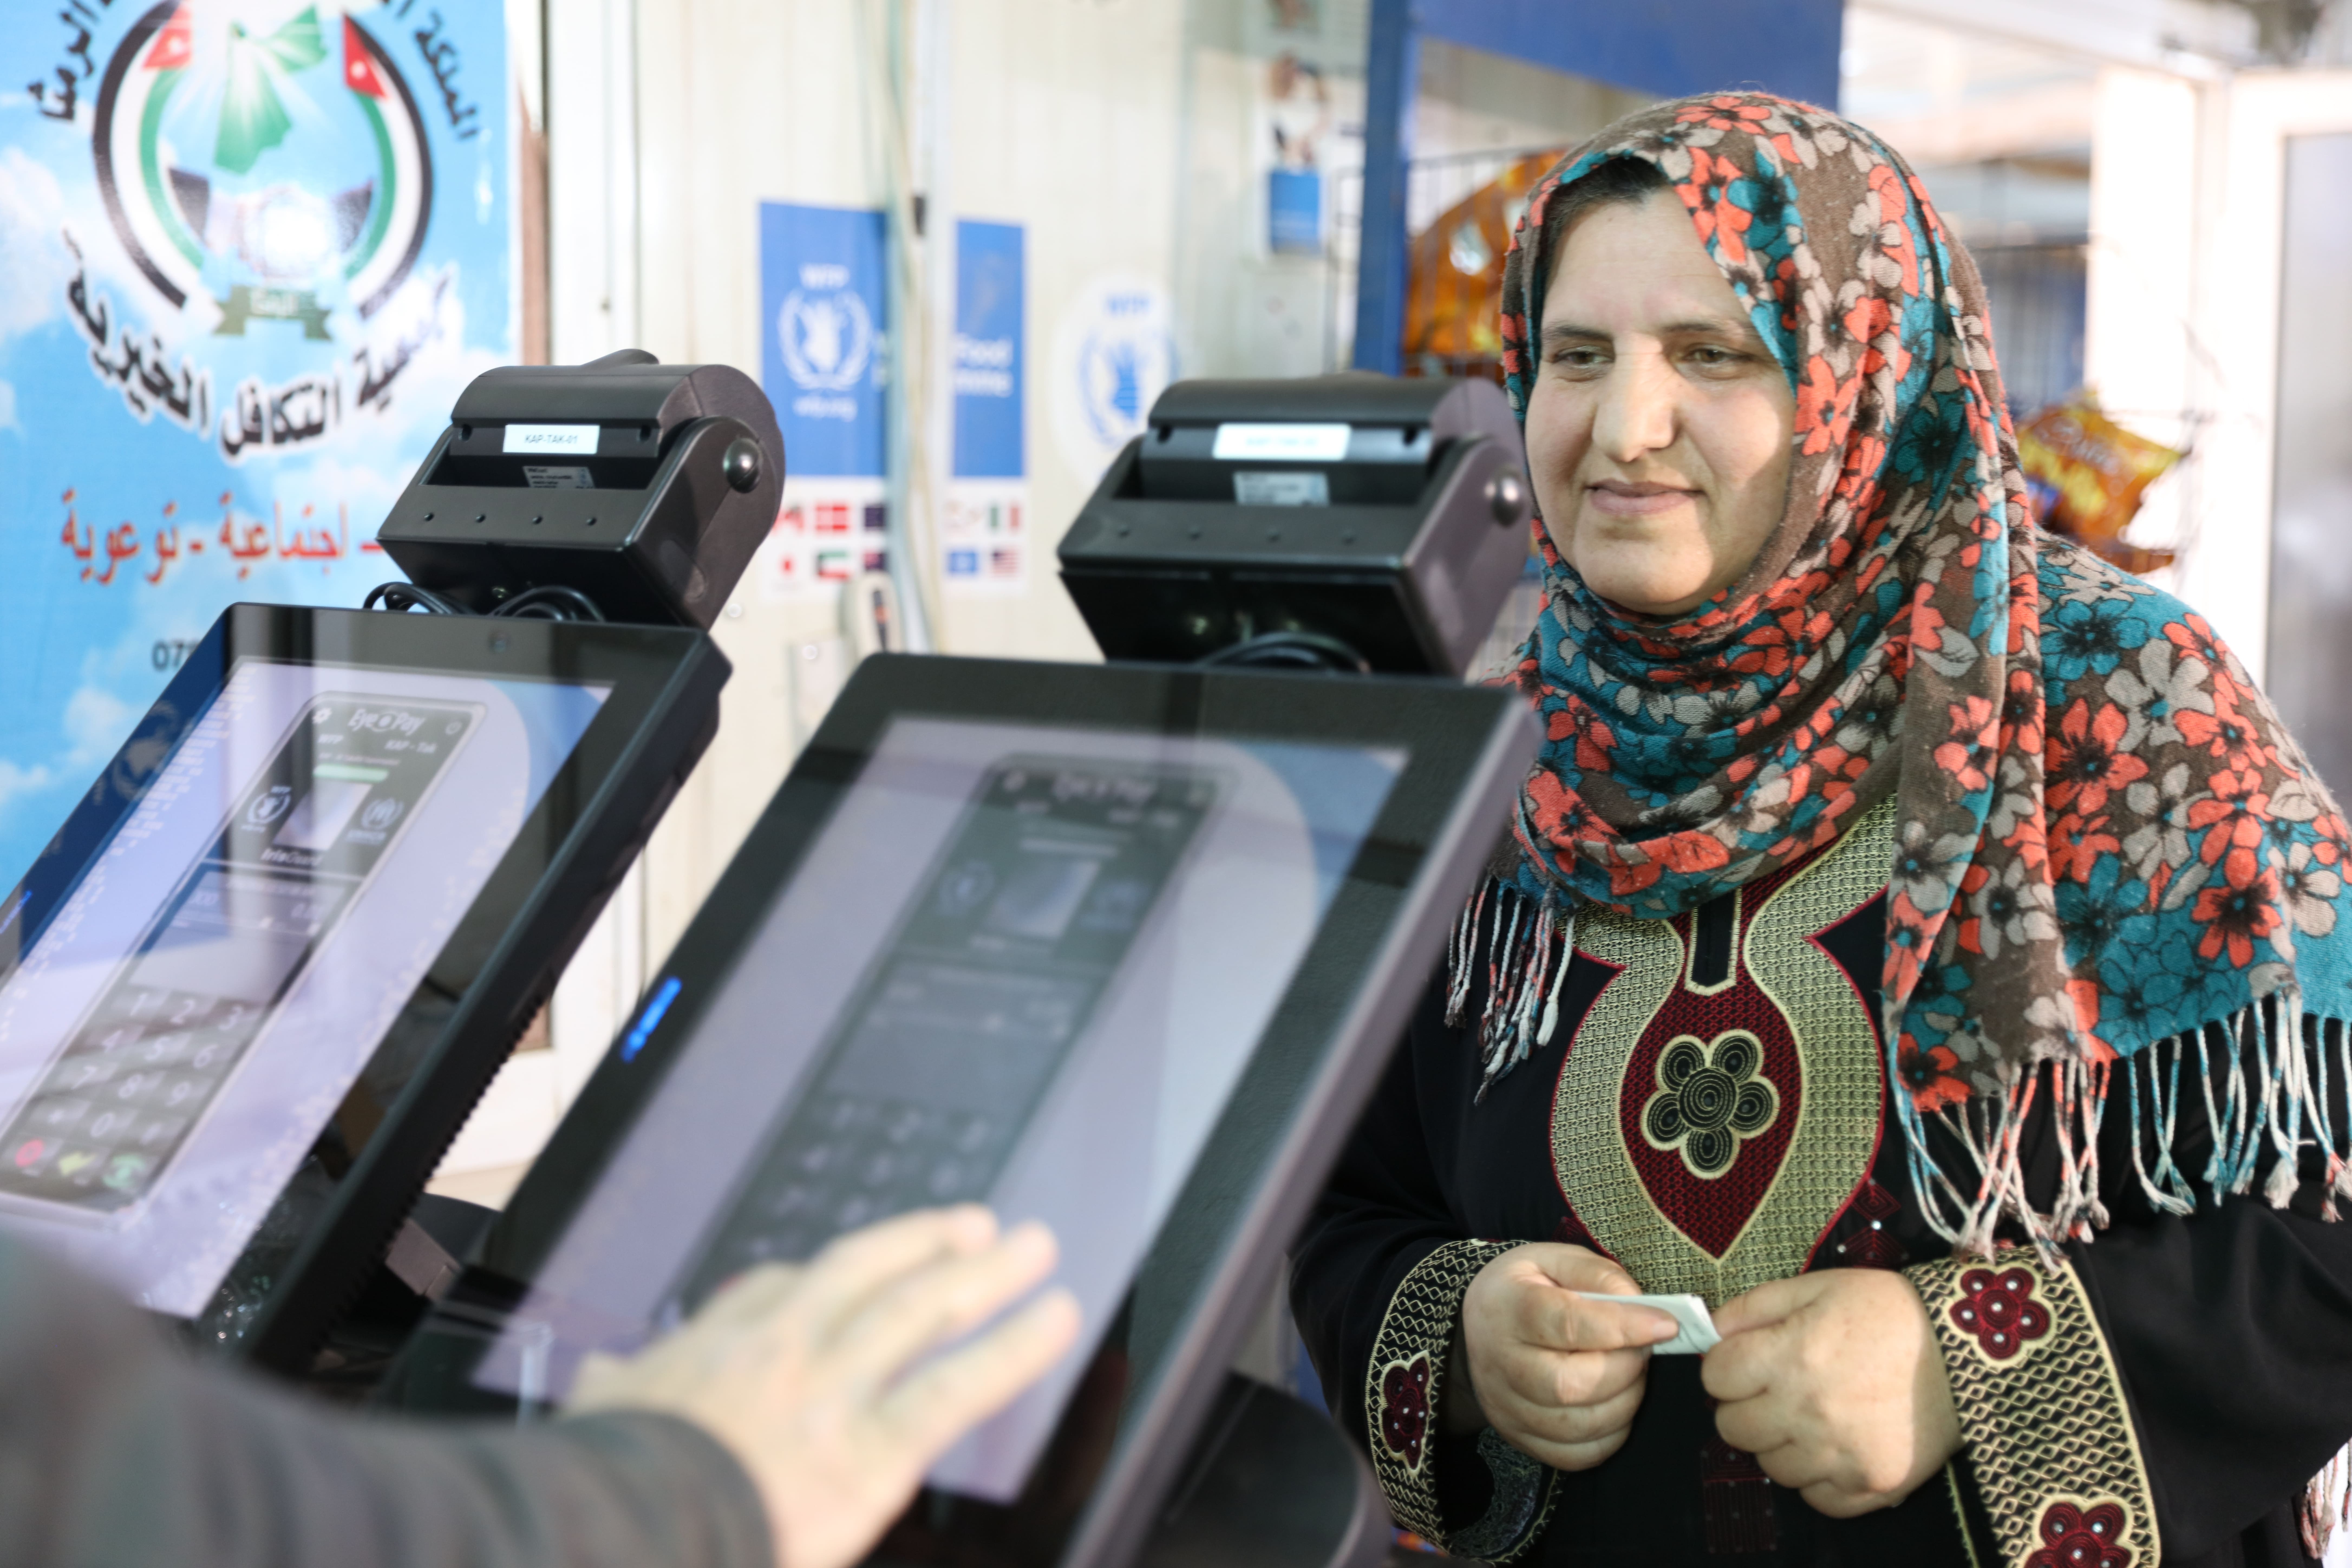 WFP provides food vouchers so Syrian refugees can purchase food